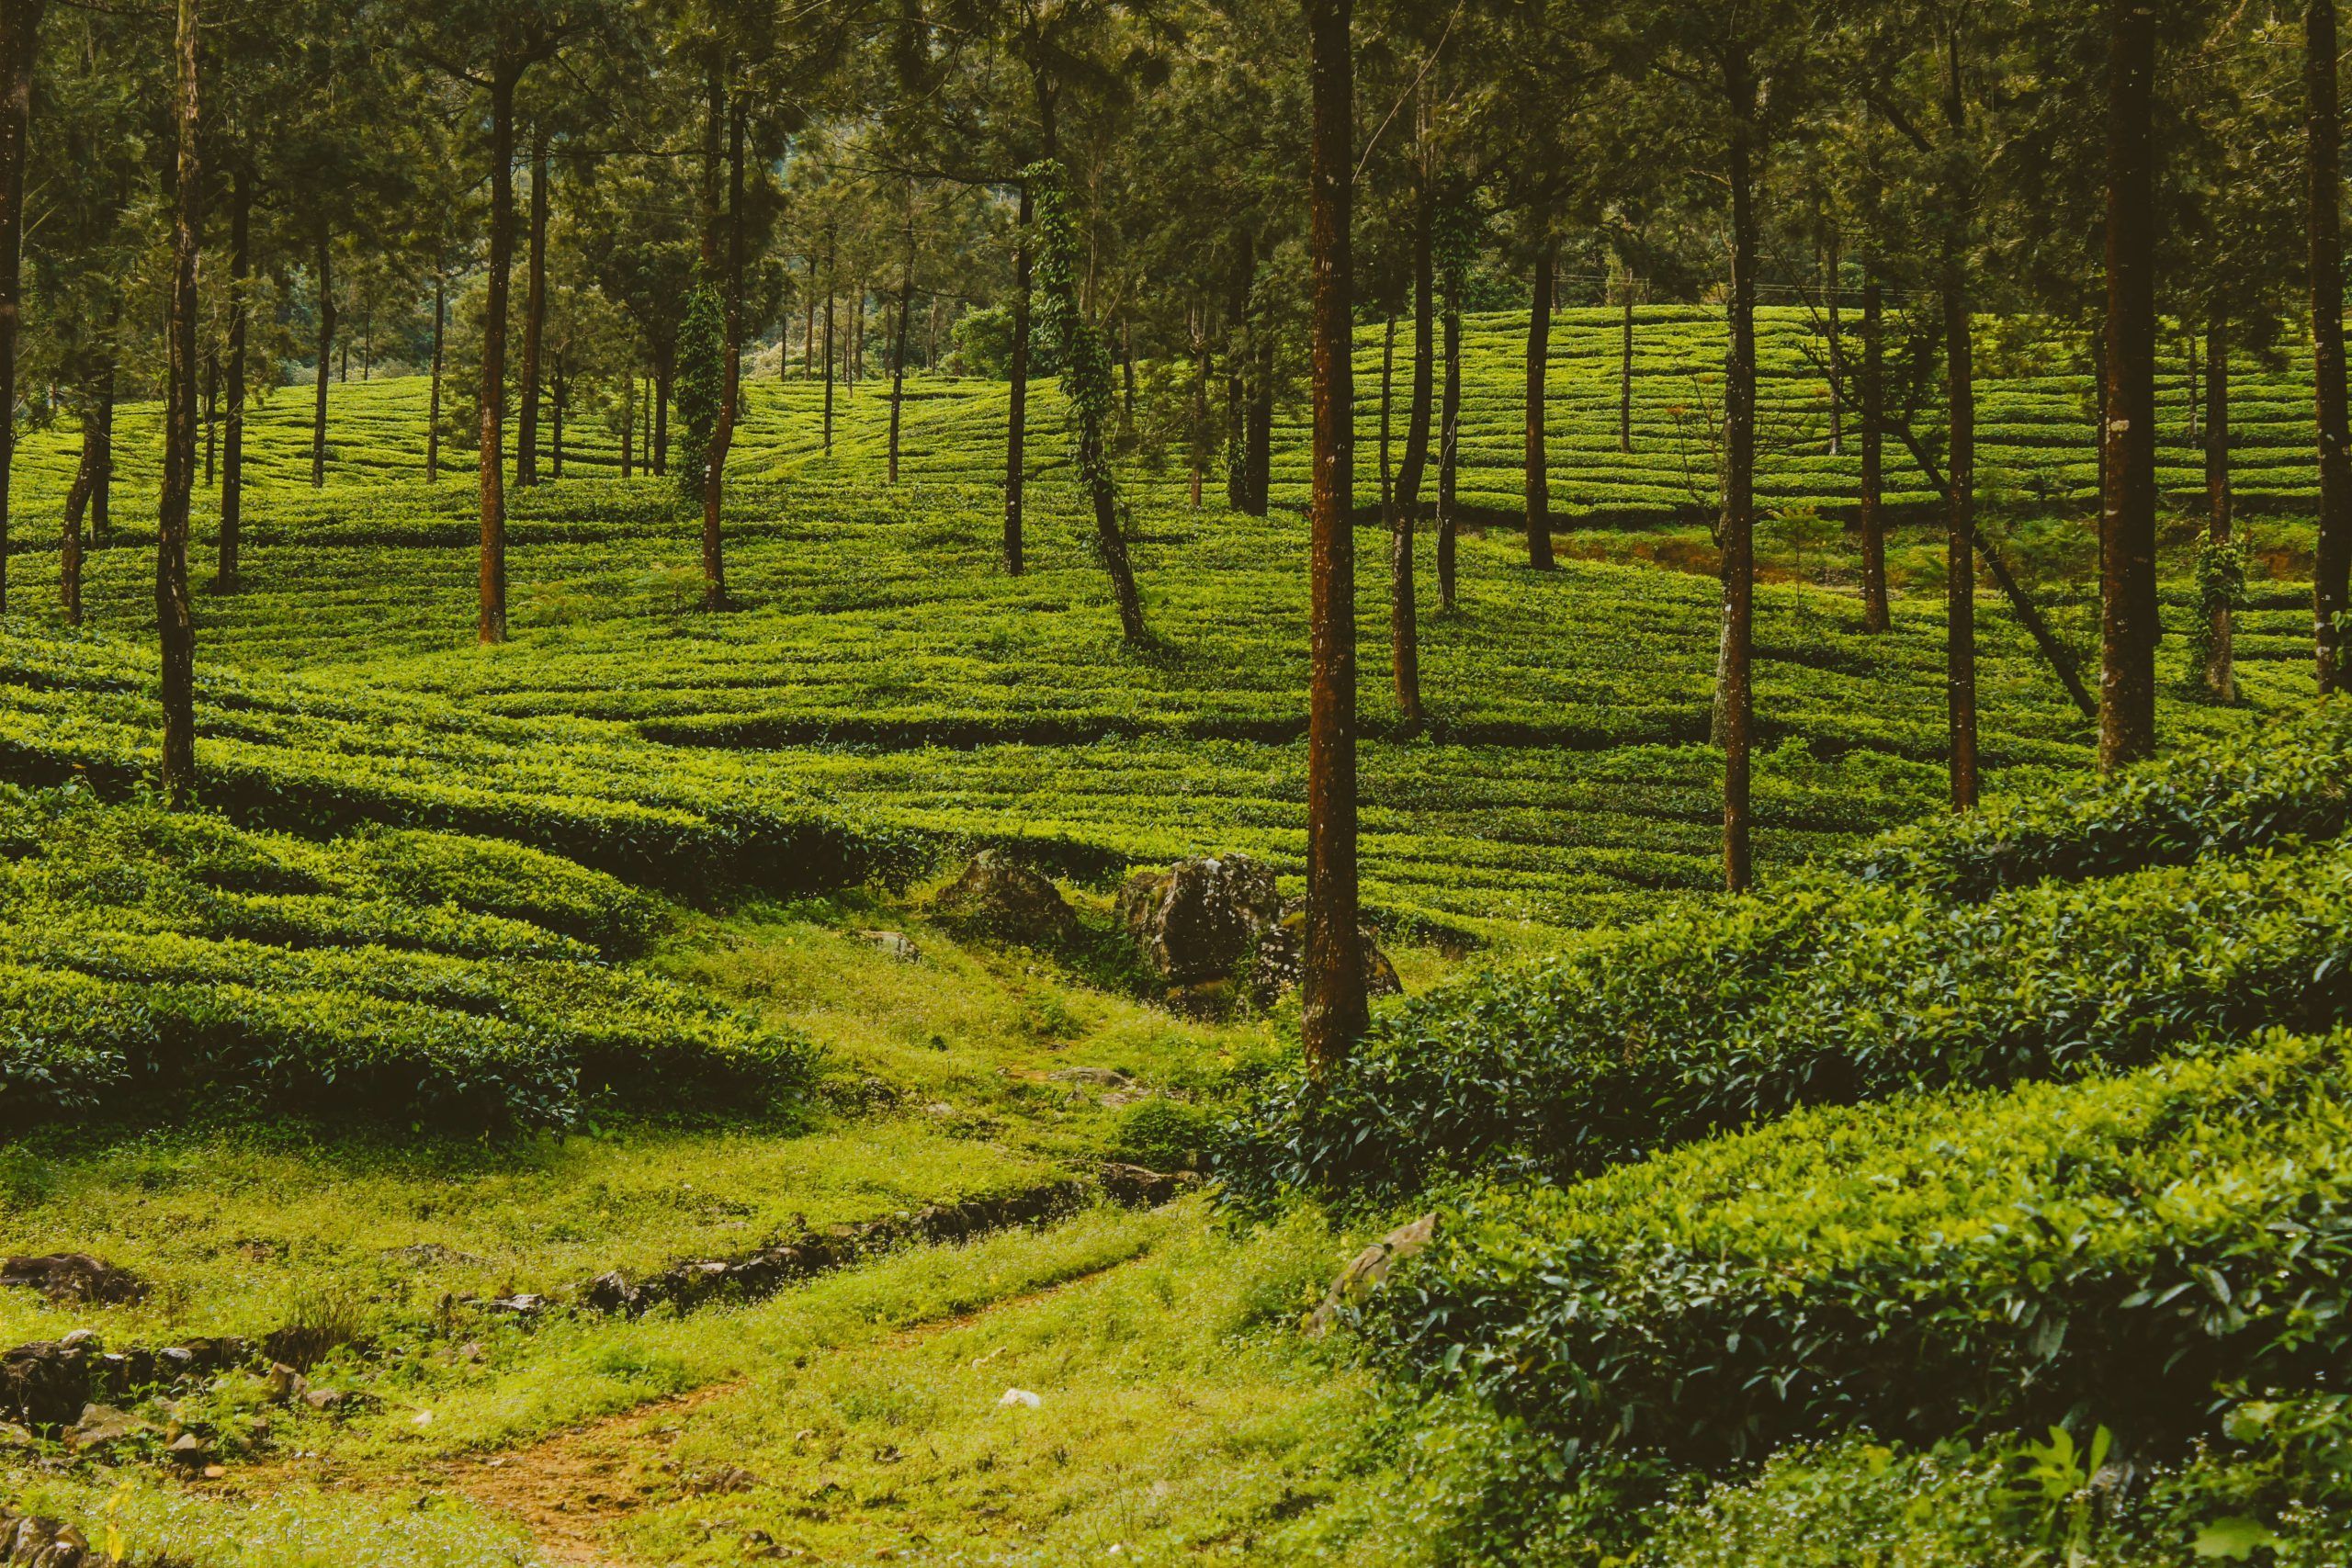 experience the beauty of tea plantation with a guided tour through lush greenery and learn the art of tea-making on a tea plantation tour.